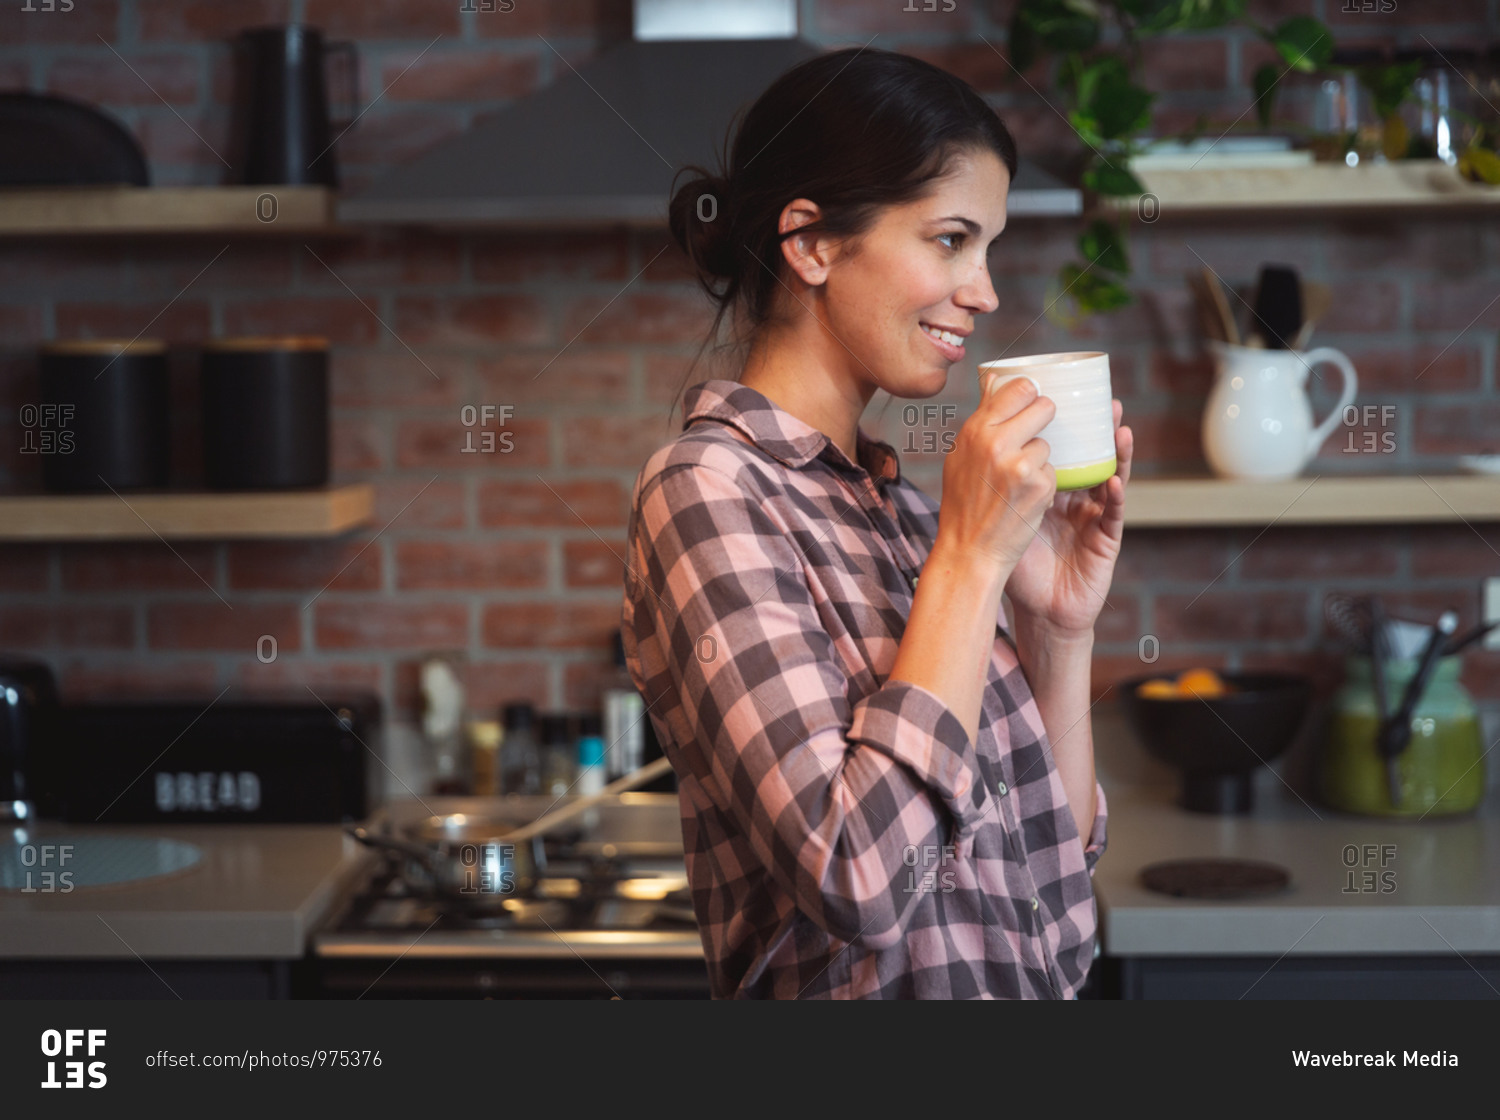 Mixed race woman spending time at home self isolating and social distancing in quarantine lockdown during coronavirus covid 19 epidemic, holding a mug of coffee in kitchen.